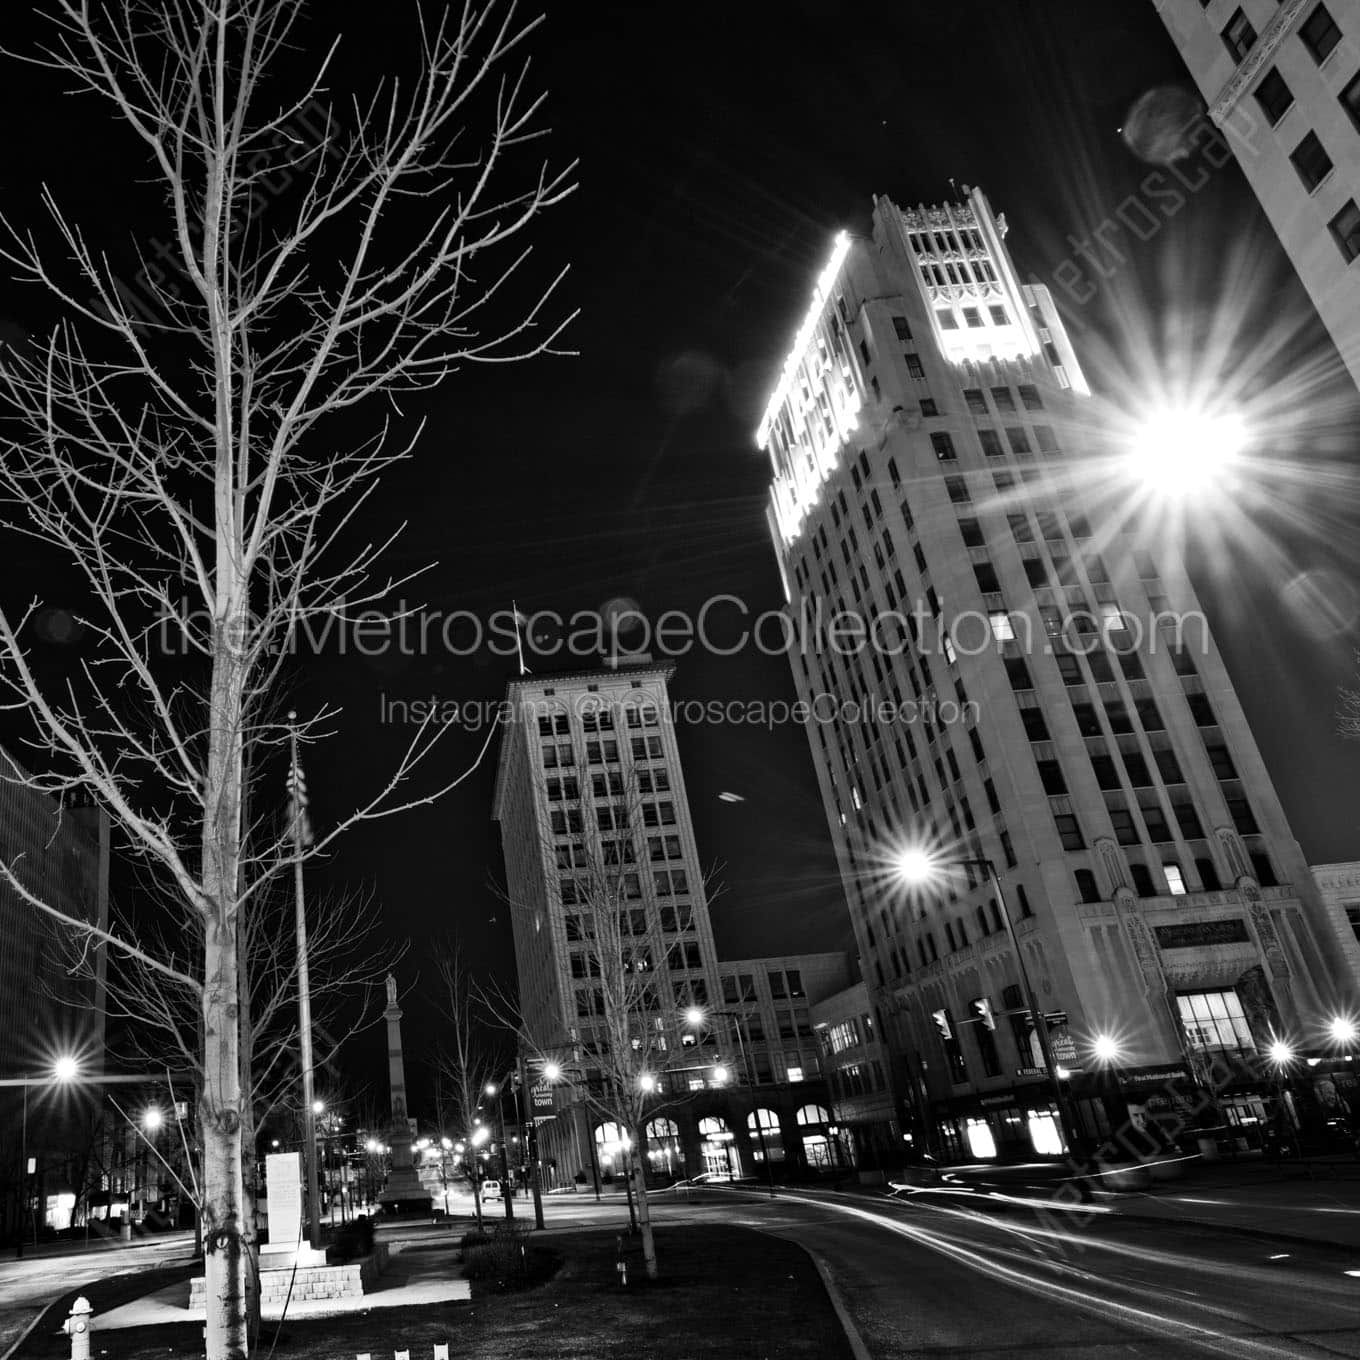 youngstown market street at night Black & White Wall Art